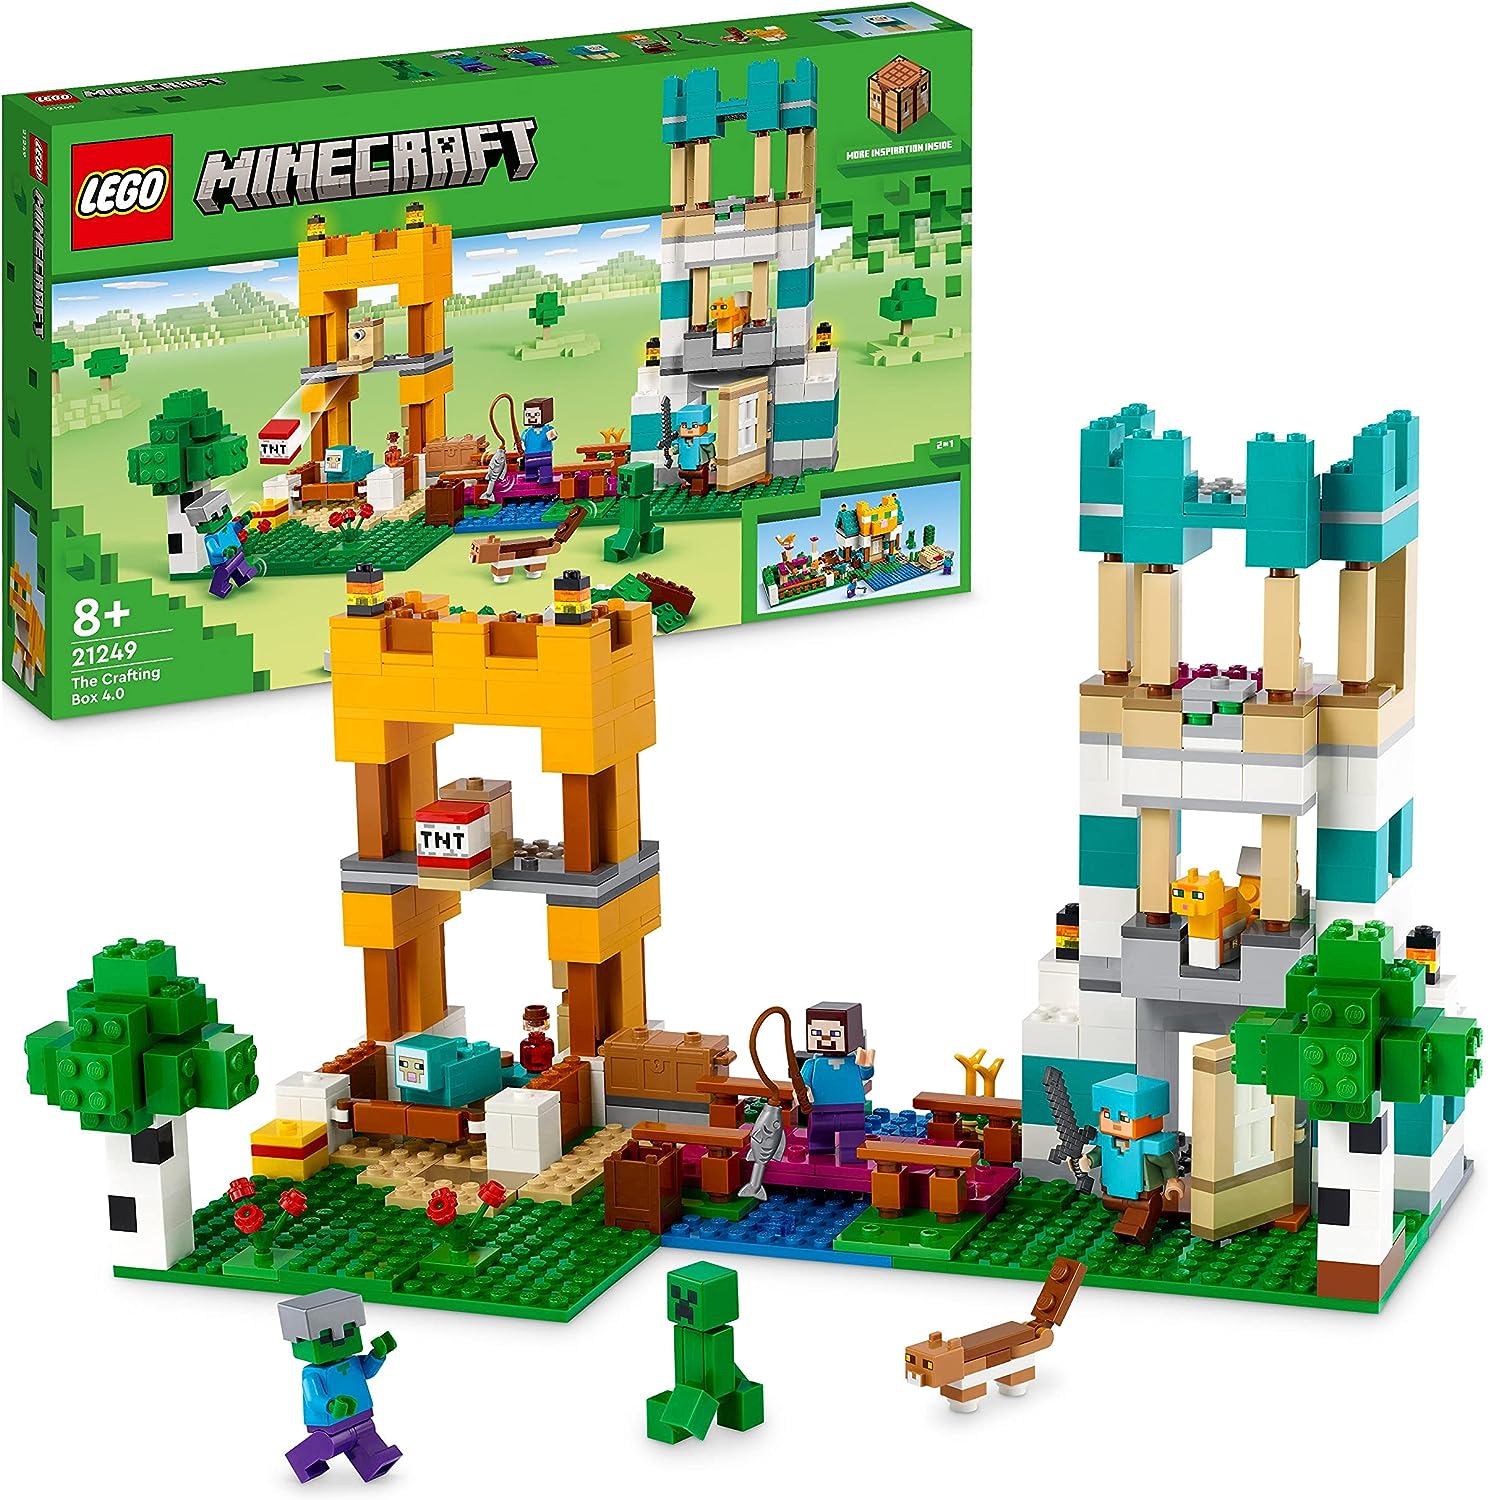 LEGO 21249 Minecraft The Crafting Box 4.0, 2-in-1 Set for Building, Towers on the River or Cat Hut, with Alex, Steve, Creeper and Zombie Mobs, Action Toy for Children, Boys and Girls